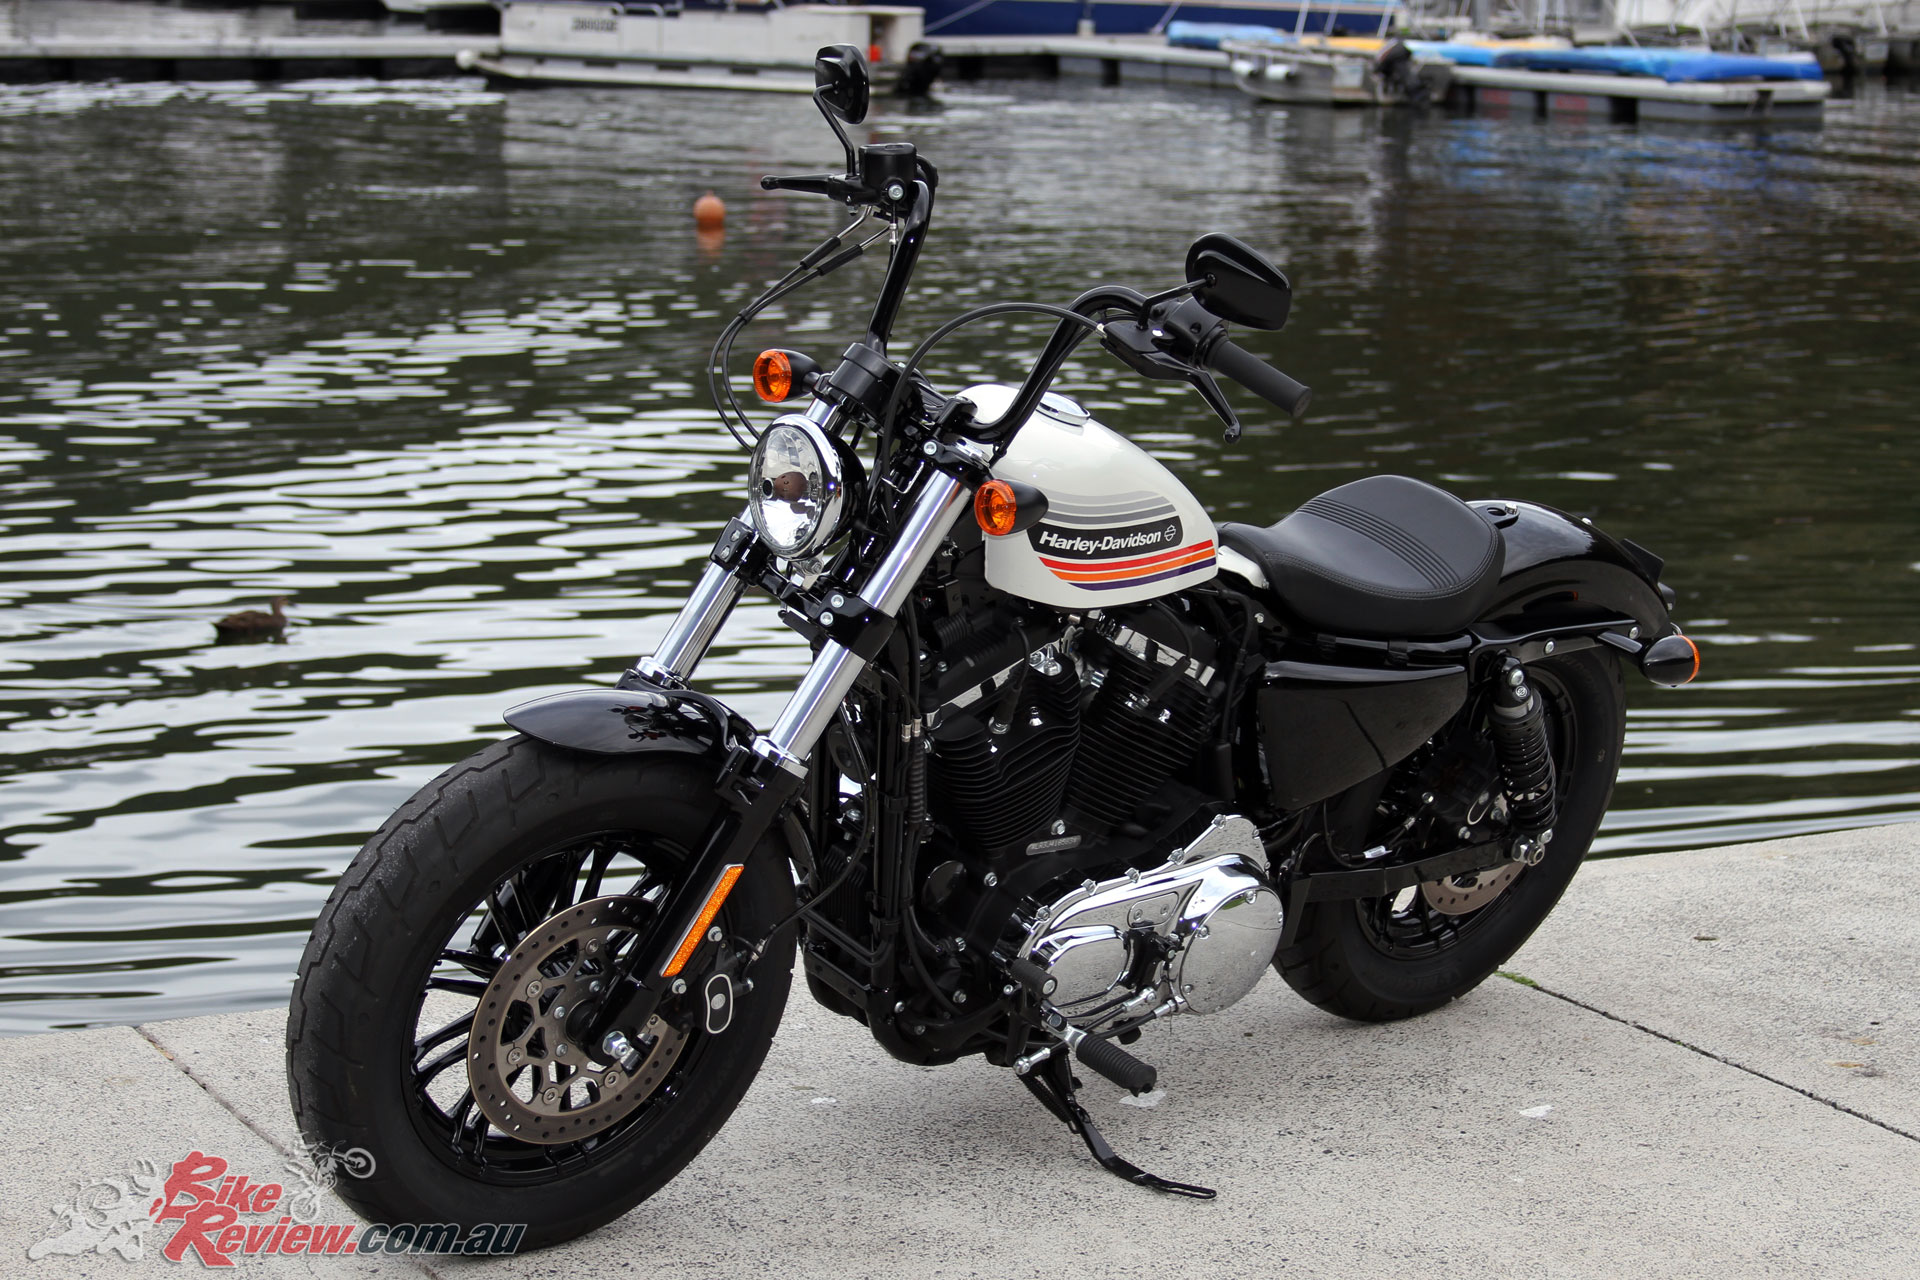 Harley's 2018 Sportster FortyEight Special